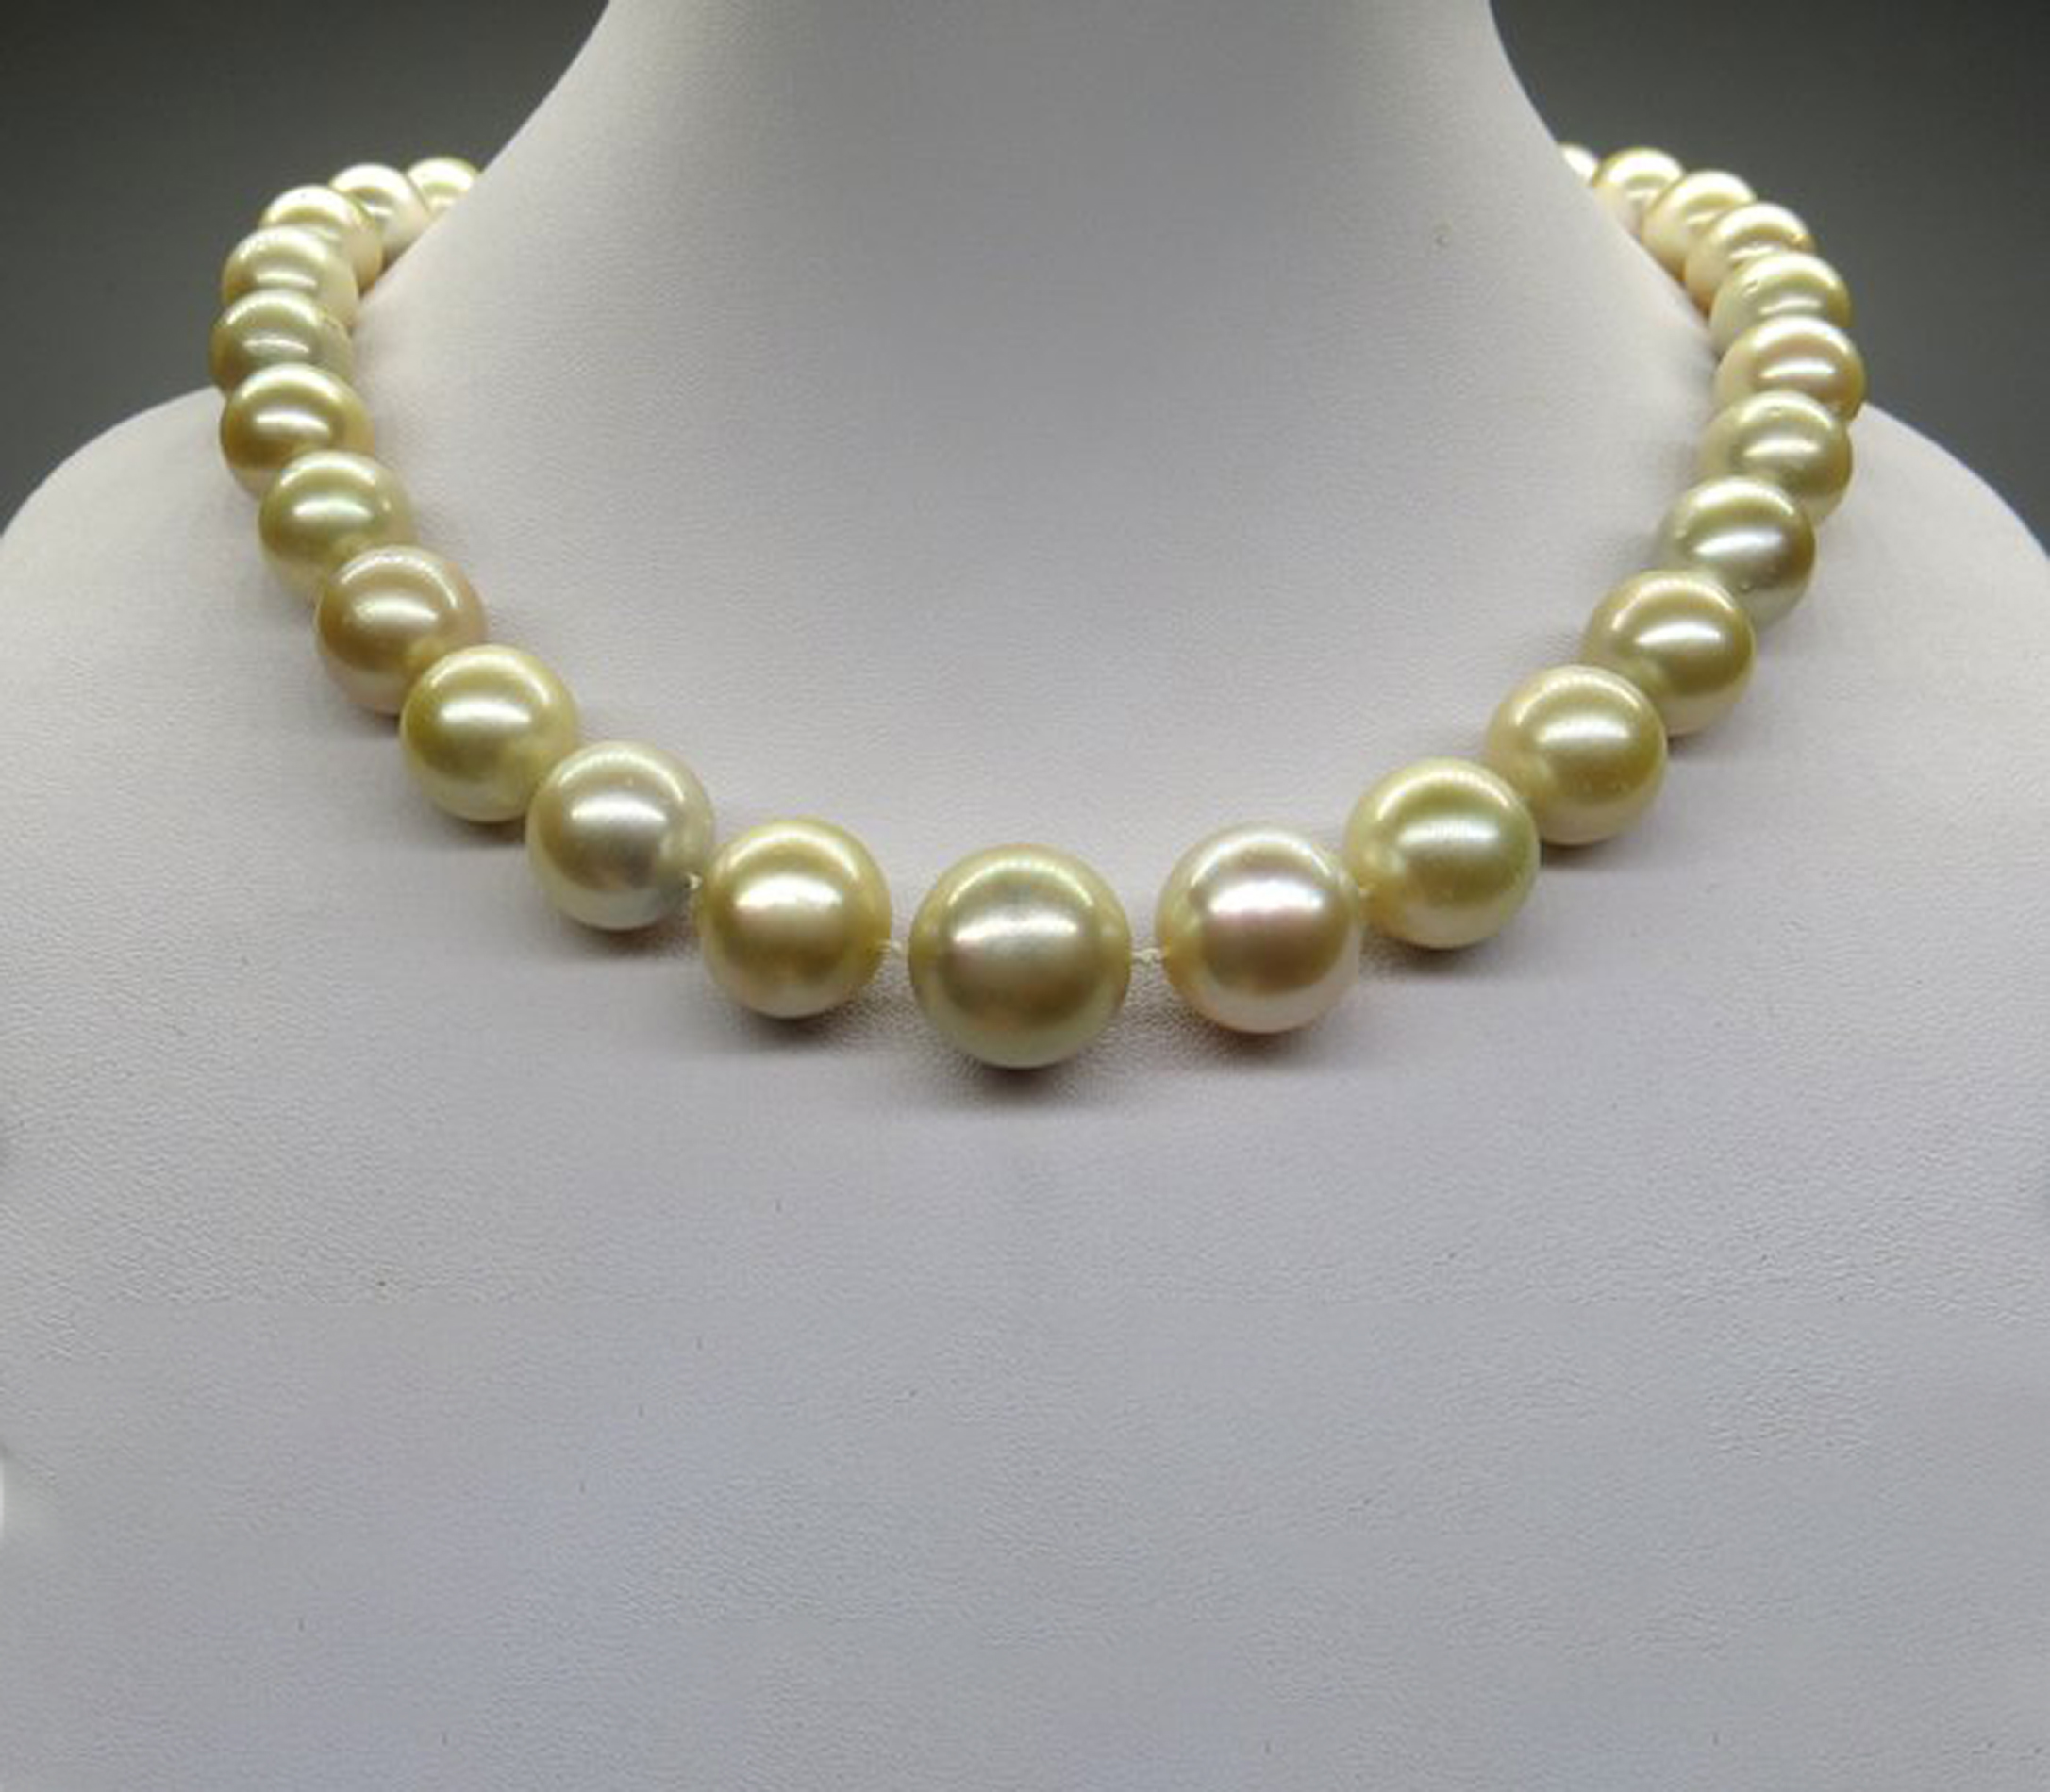 Necklace in Cream and Gold Toned Australian Pearl Necklace with 14k Yellow Gold Gallon Ball Clasp - Bild 2 aus 5